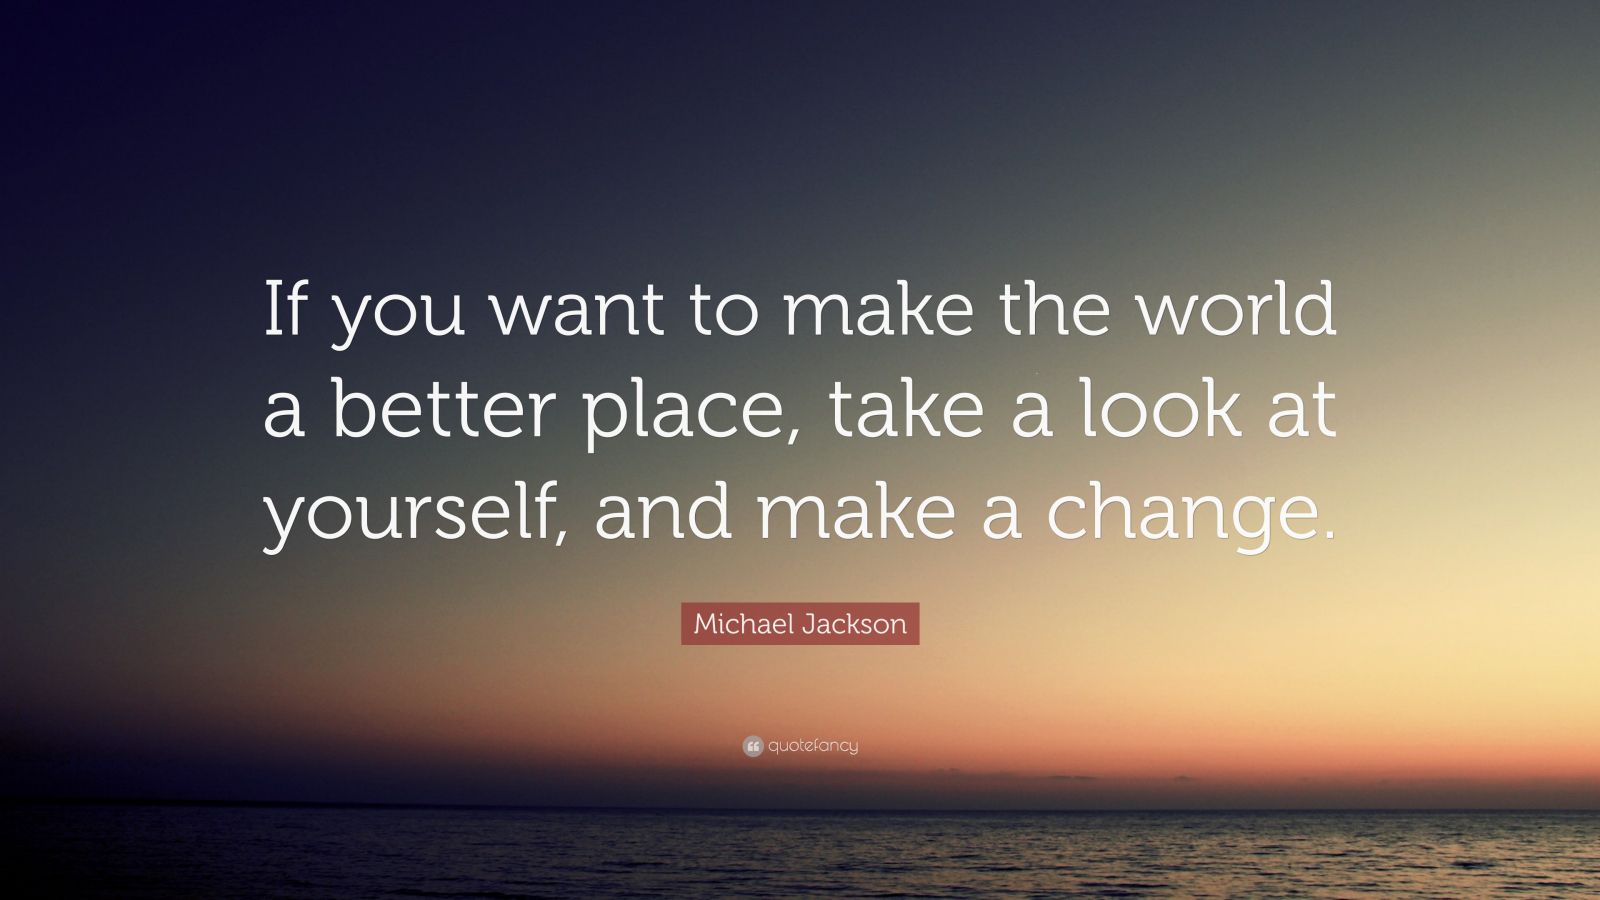 Michael Jackson Quote: “If you want to make the world a better place, take a look at ...1600 x 900